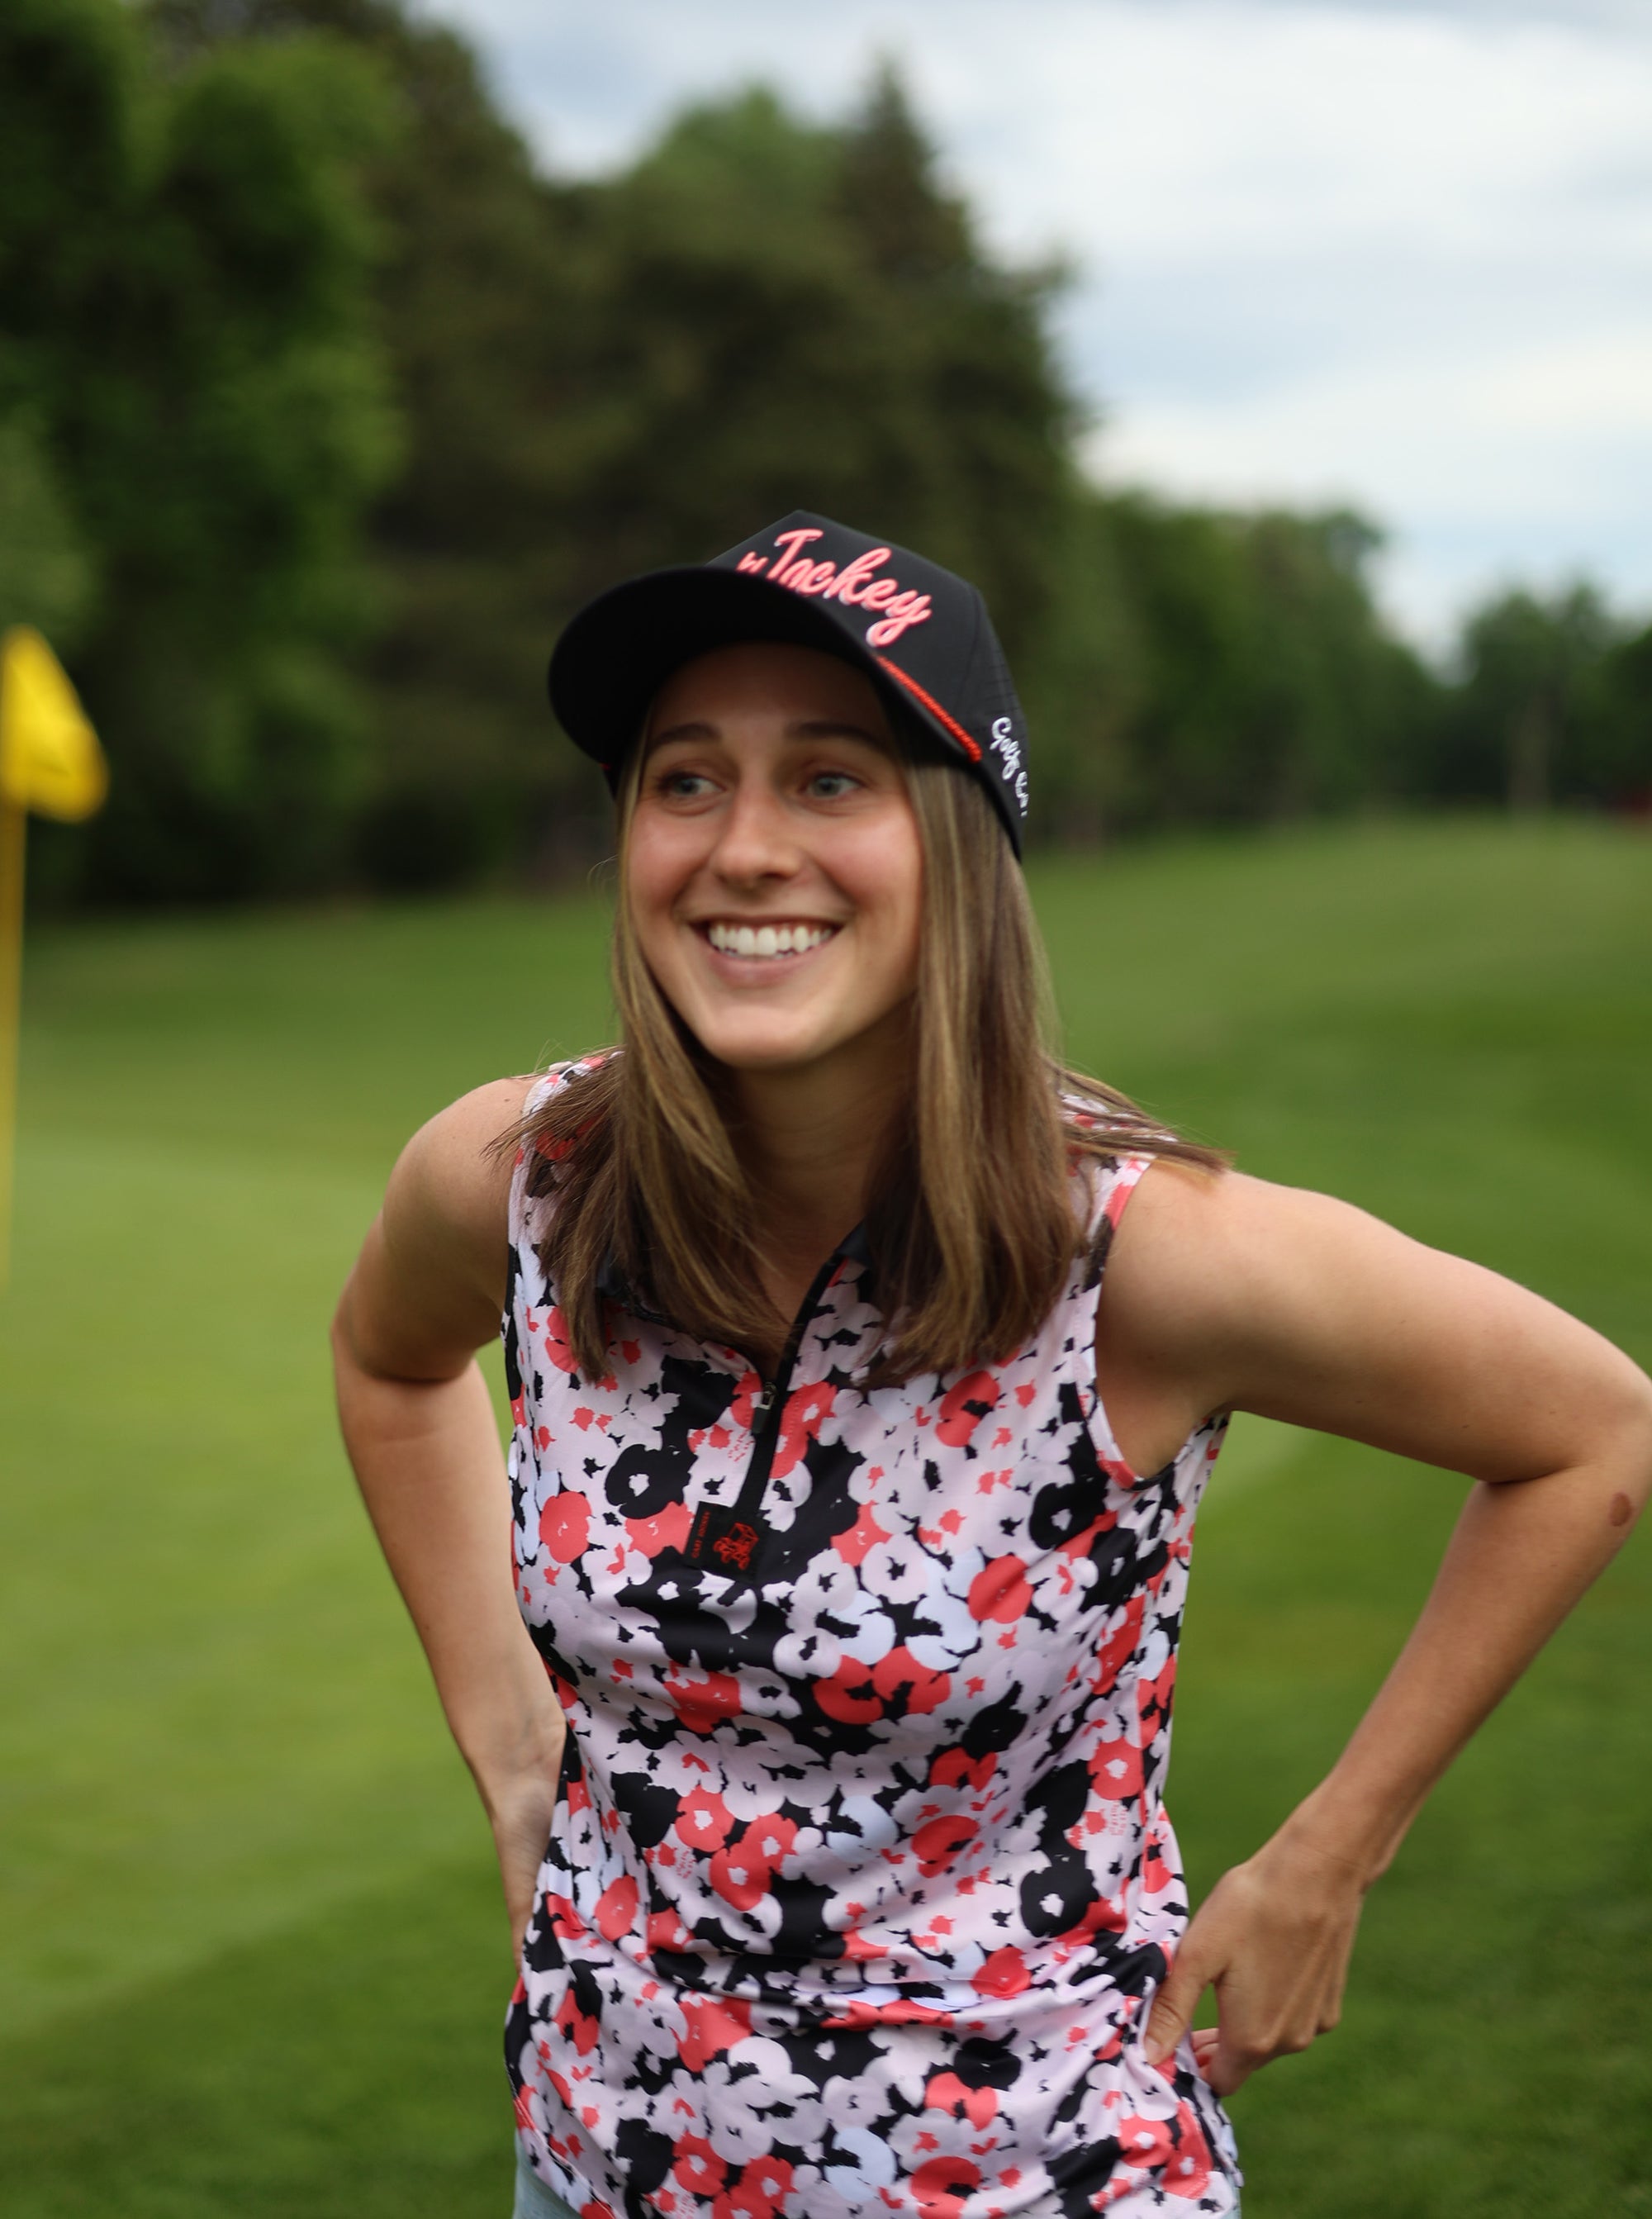 a young woman in a floral top and hat standing on a golf course.